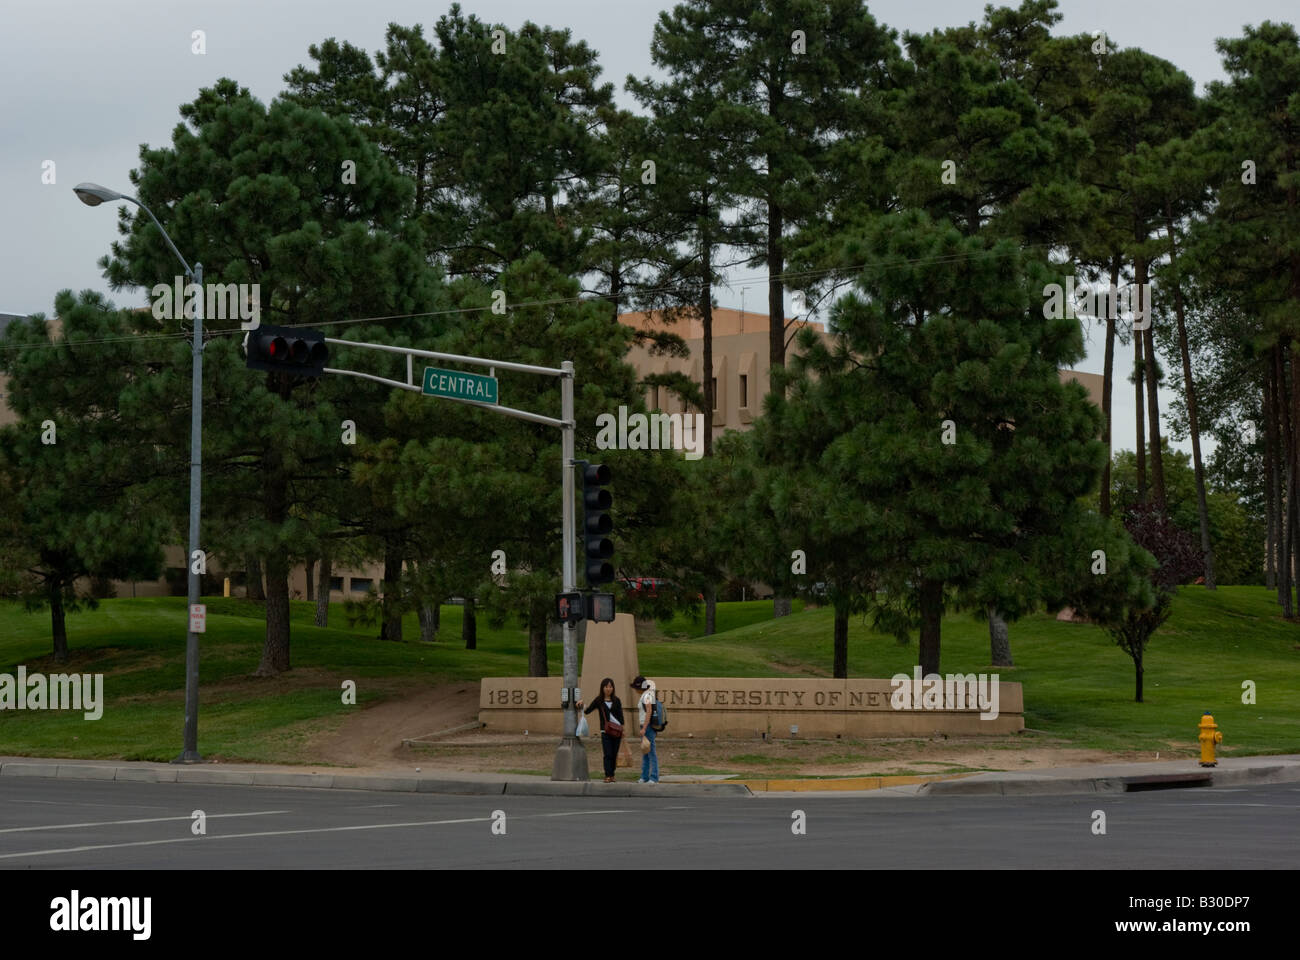 Two girls in front of the University of New Mexico sign in Albuquerque's Central Avenue Stock Photo